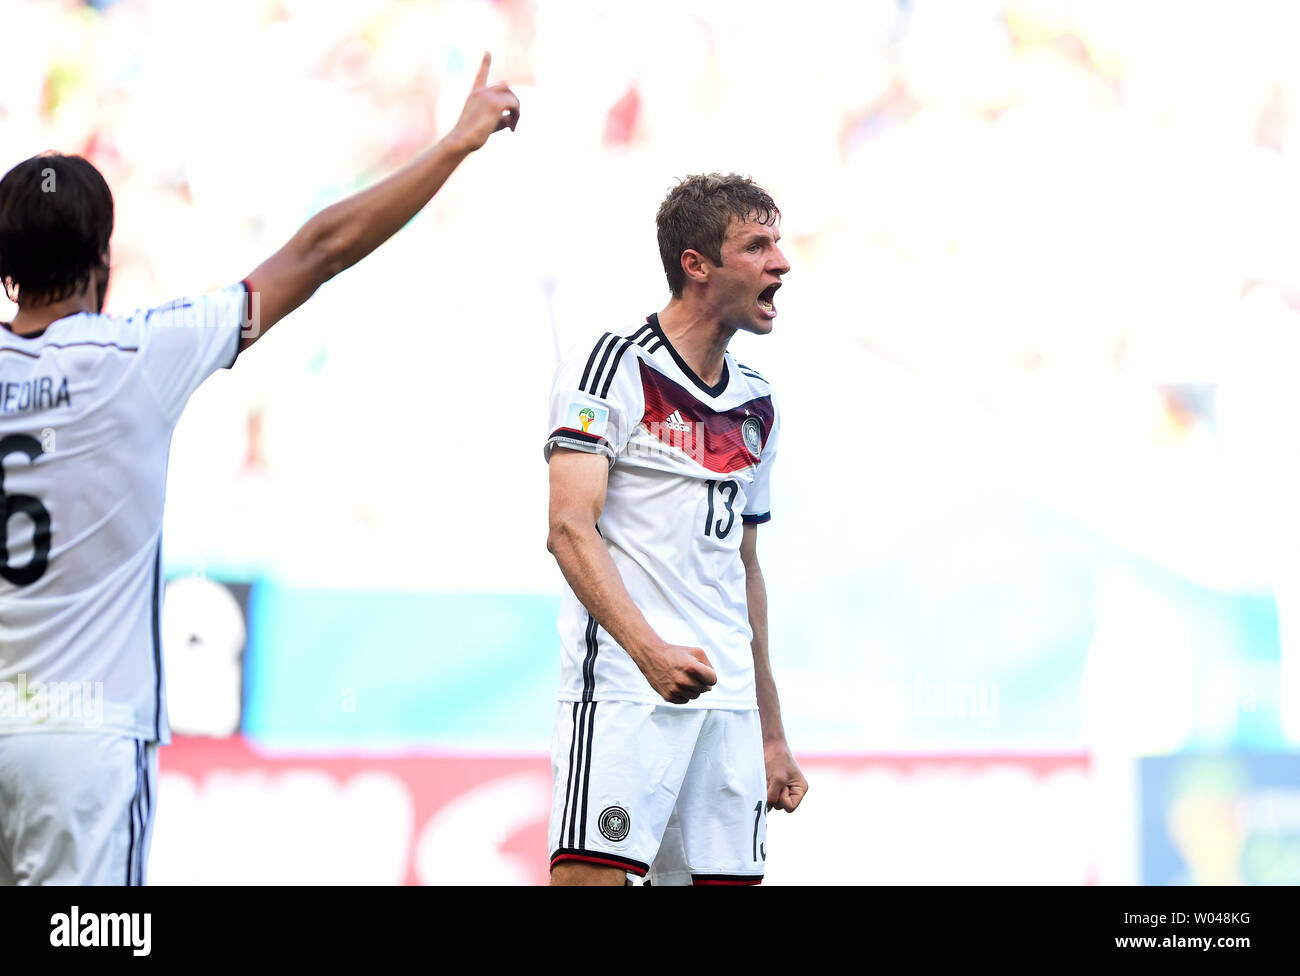 Thomas Muller of Germany celebrates scoring during the 2014 FIFA World Cup Group G match at the Arena Fonte Nova in Salvador, Brazil on June 16, 2014. UPI/Chris Brunskill Stock Photo